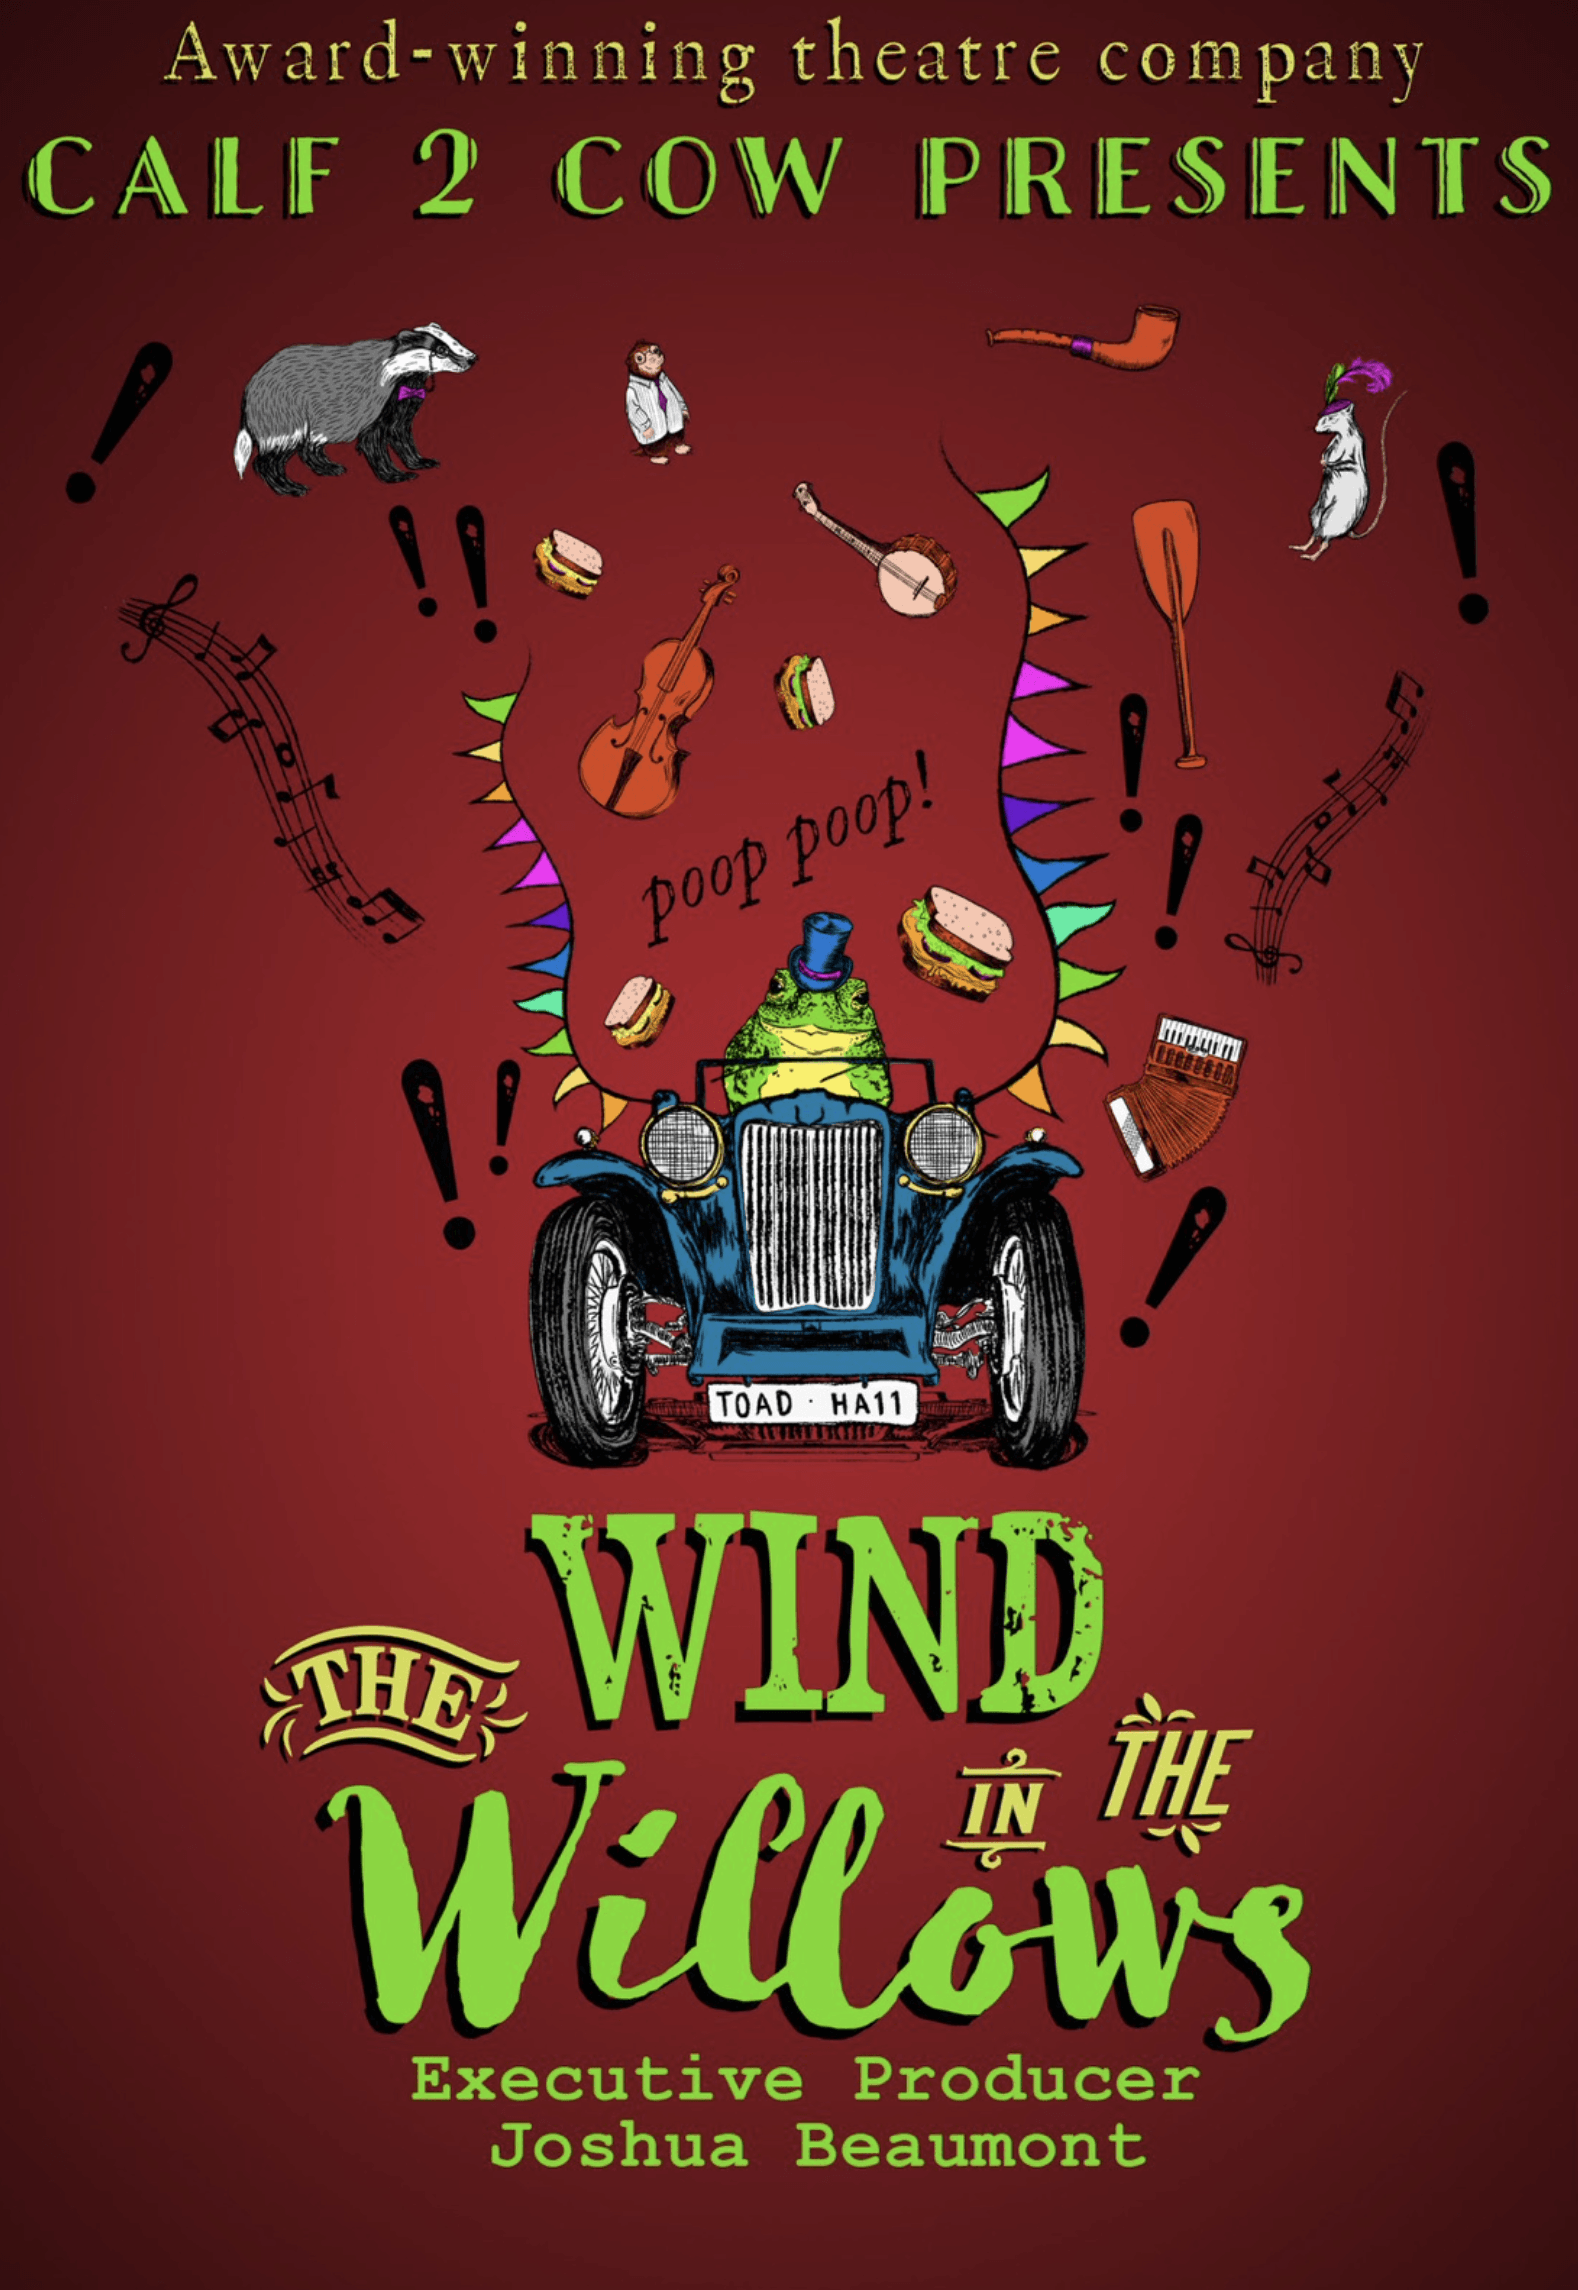 A poster for the wind in the willows by calf 2 cow